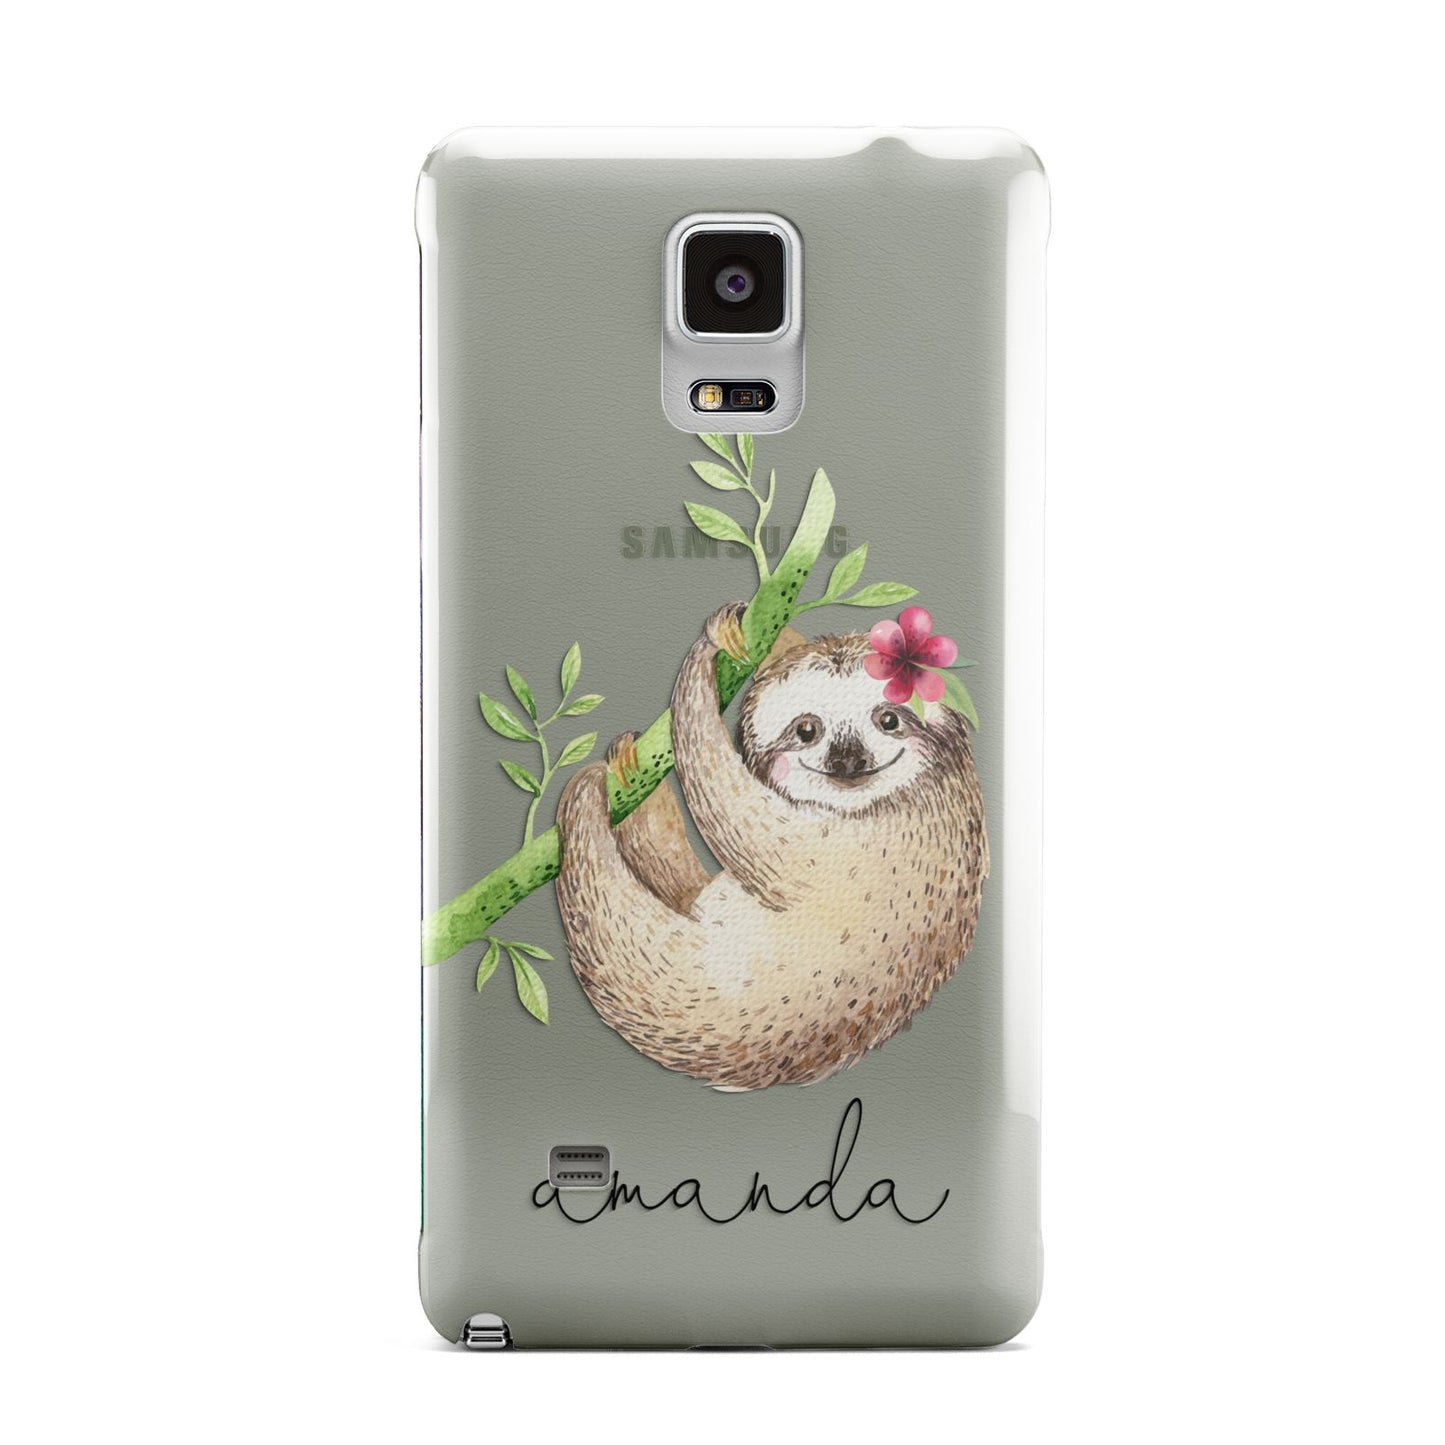 Personalised Sloth Samsung Galaxy Note 4 Case